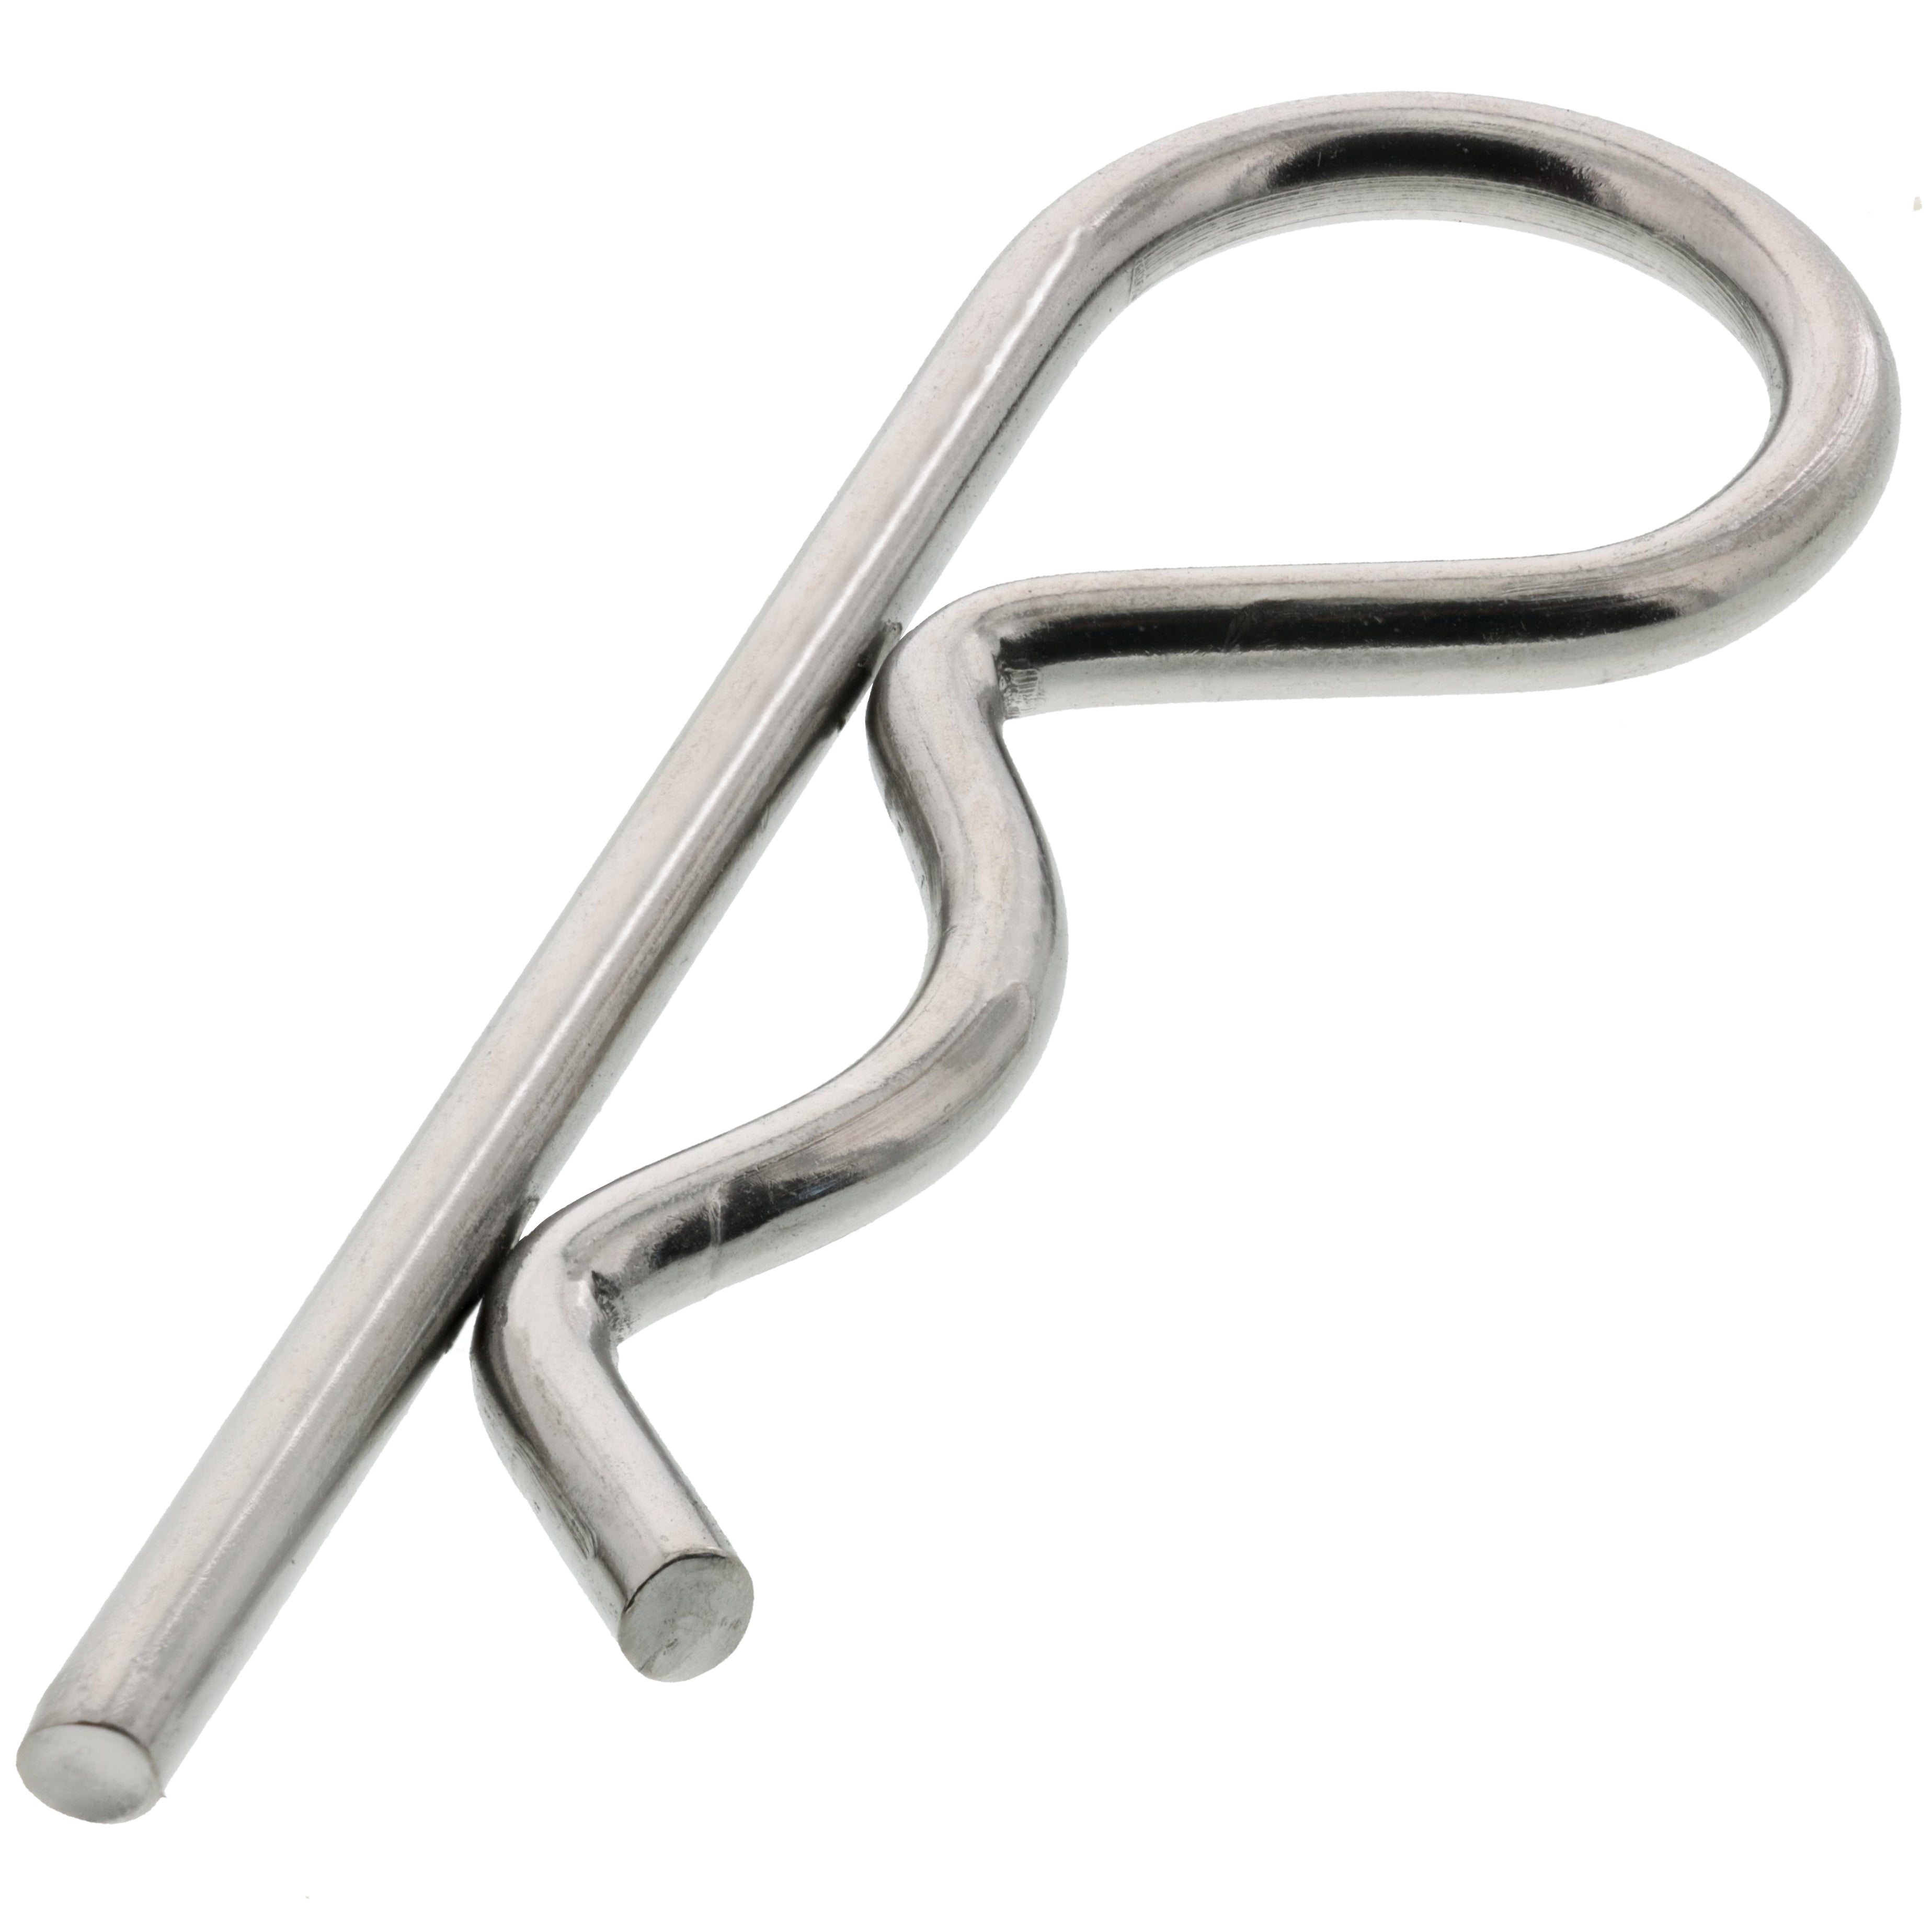 5mm Stainless Steel Hairpin Cotter